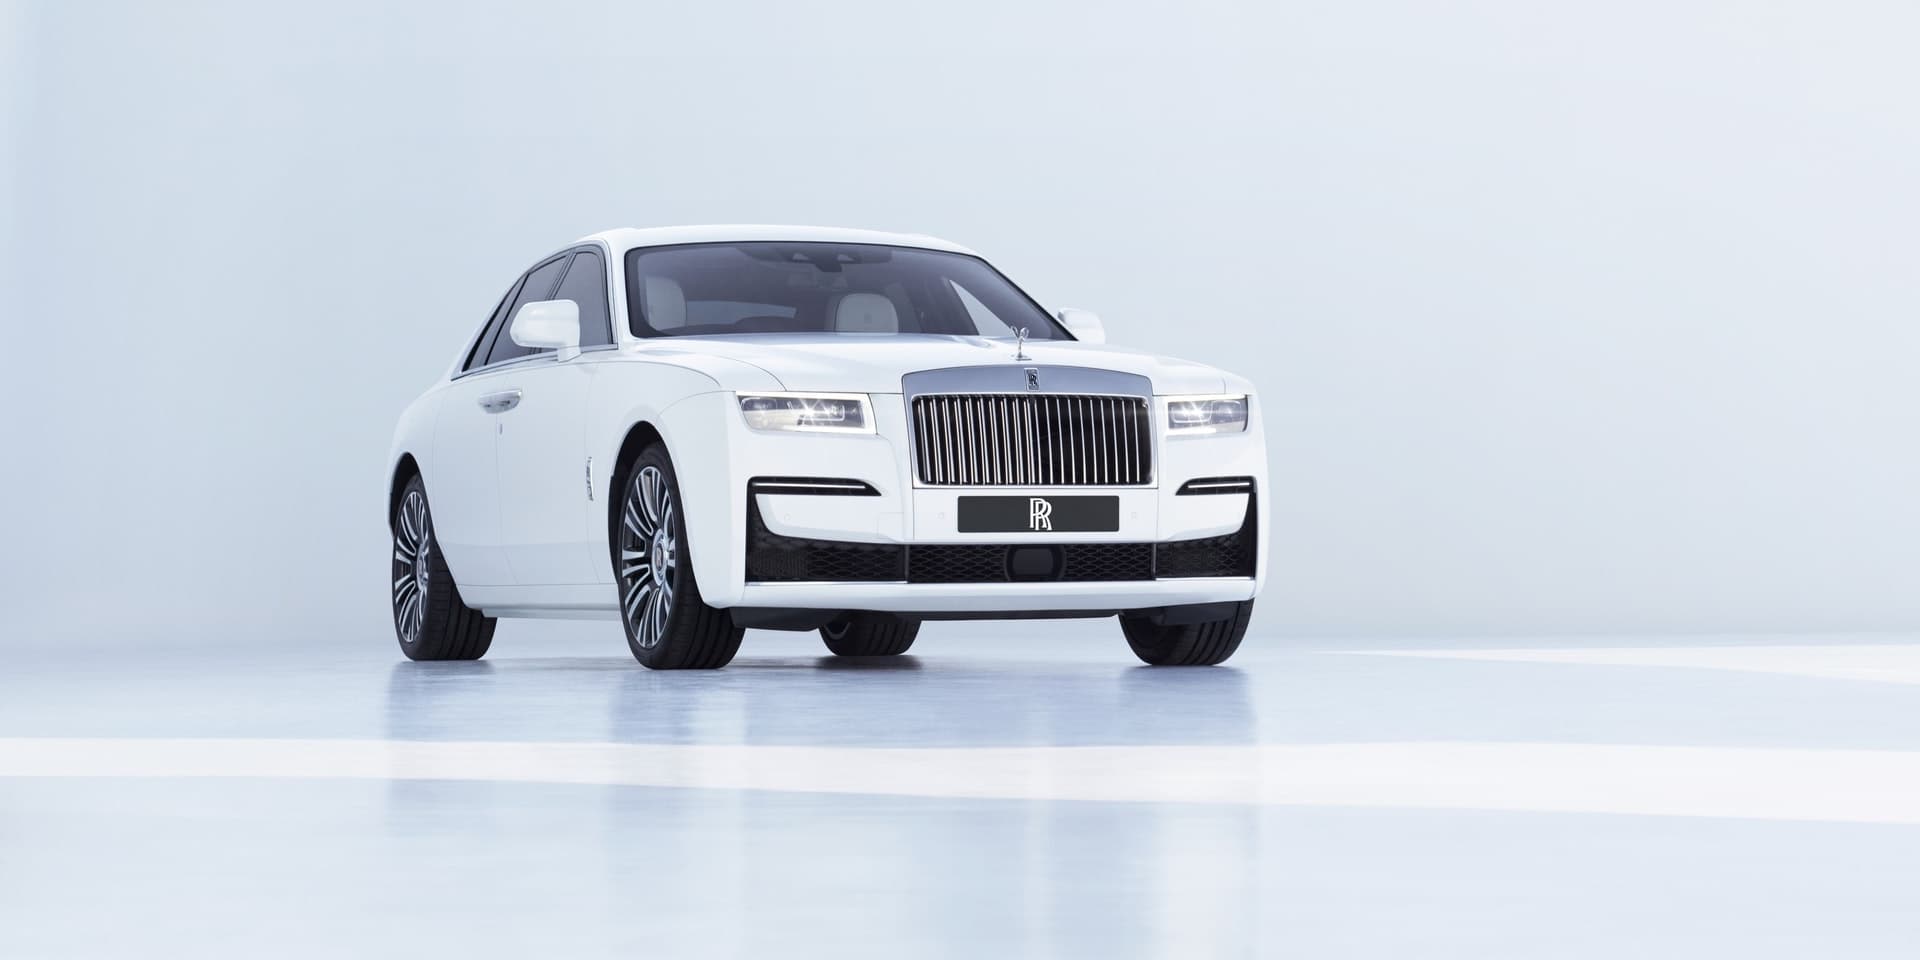 New Rolls-Royce Ghost 2020 | The Car Expert